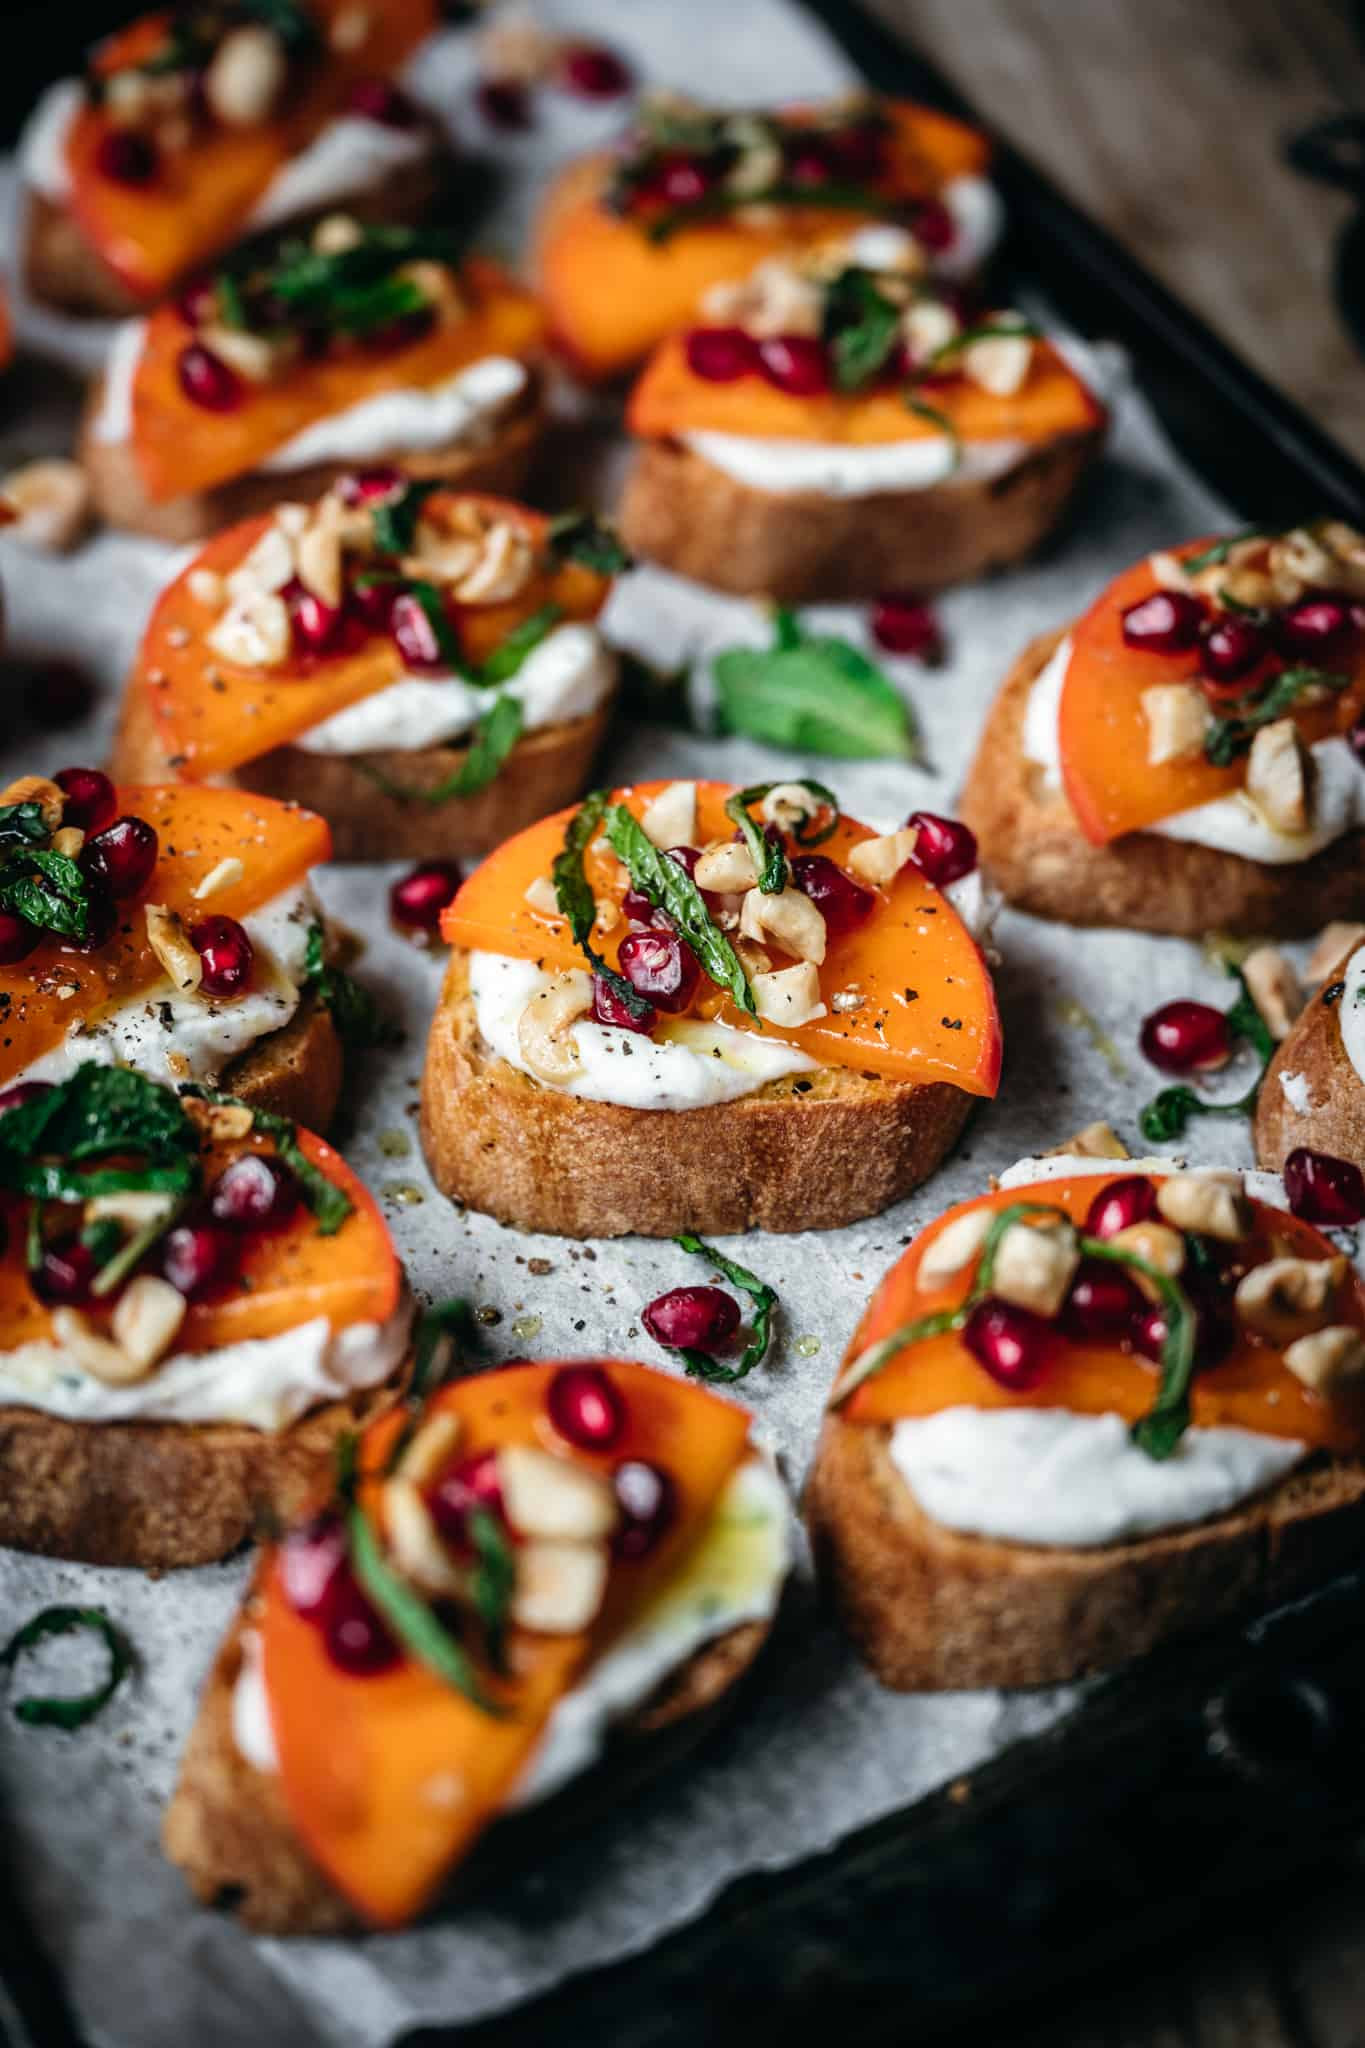 Don’t Miss Our 15 Most Shared Vegan Appetizer Recipes